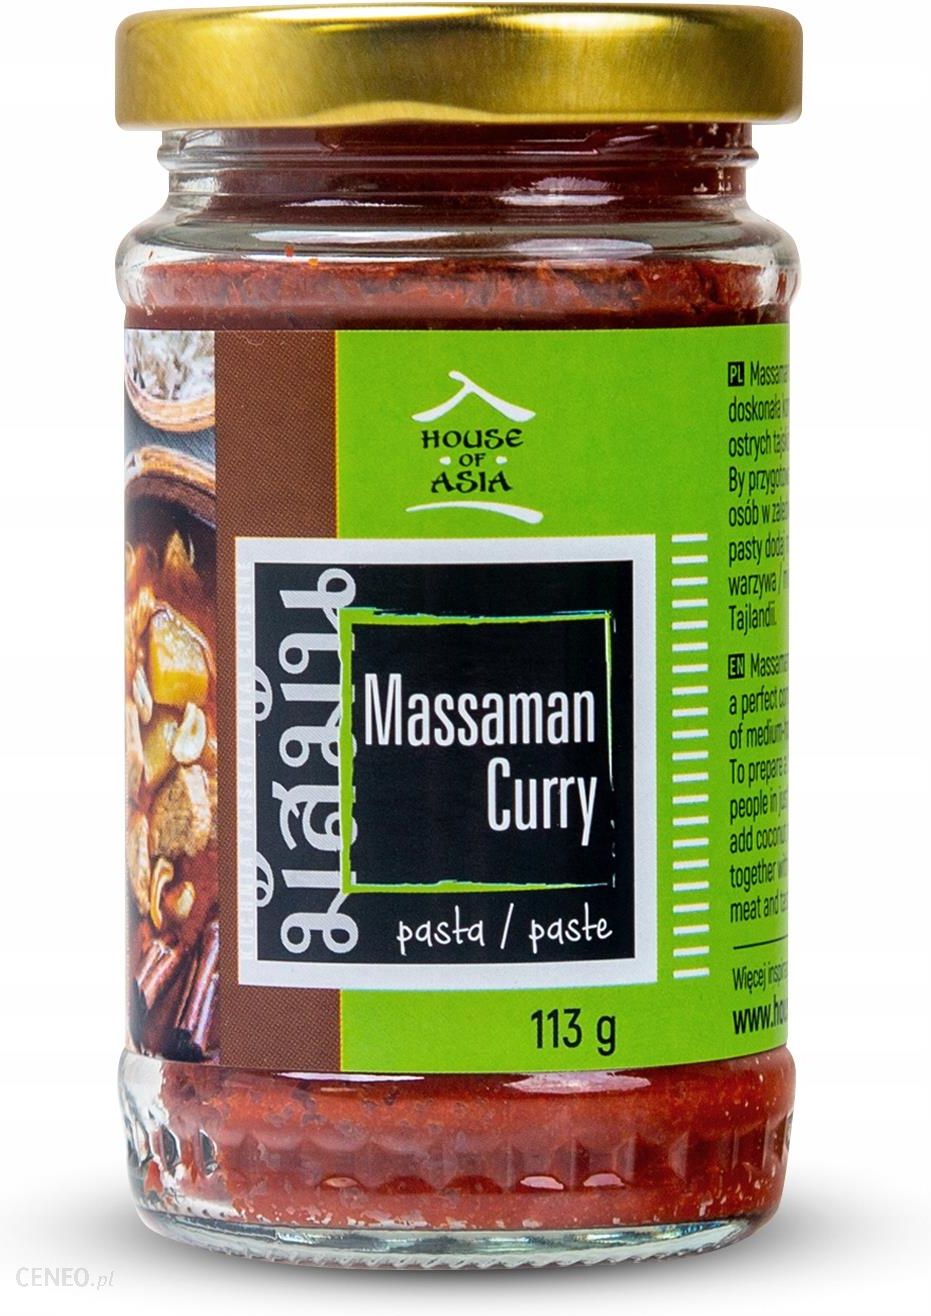 House of Asia Massaman curry Pasta 113 g - Ceny i opinie 